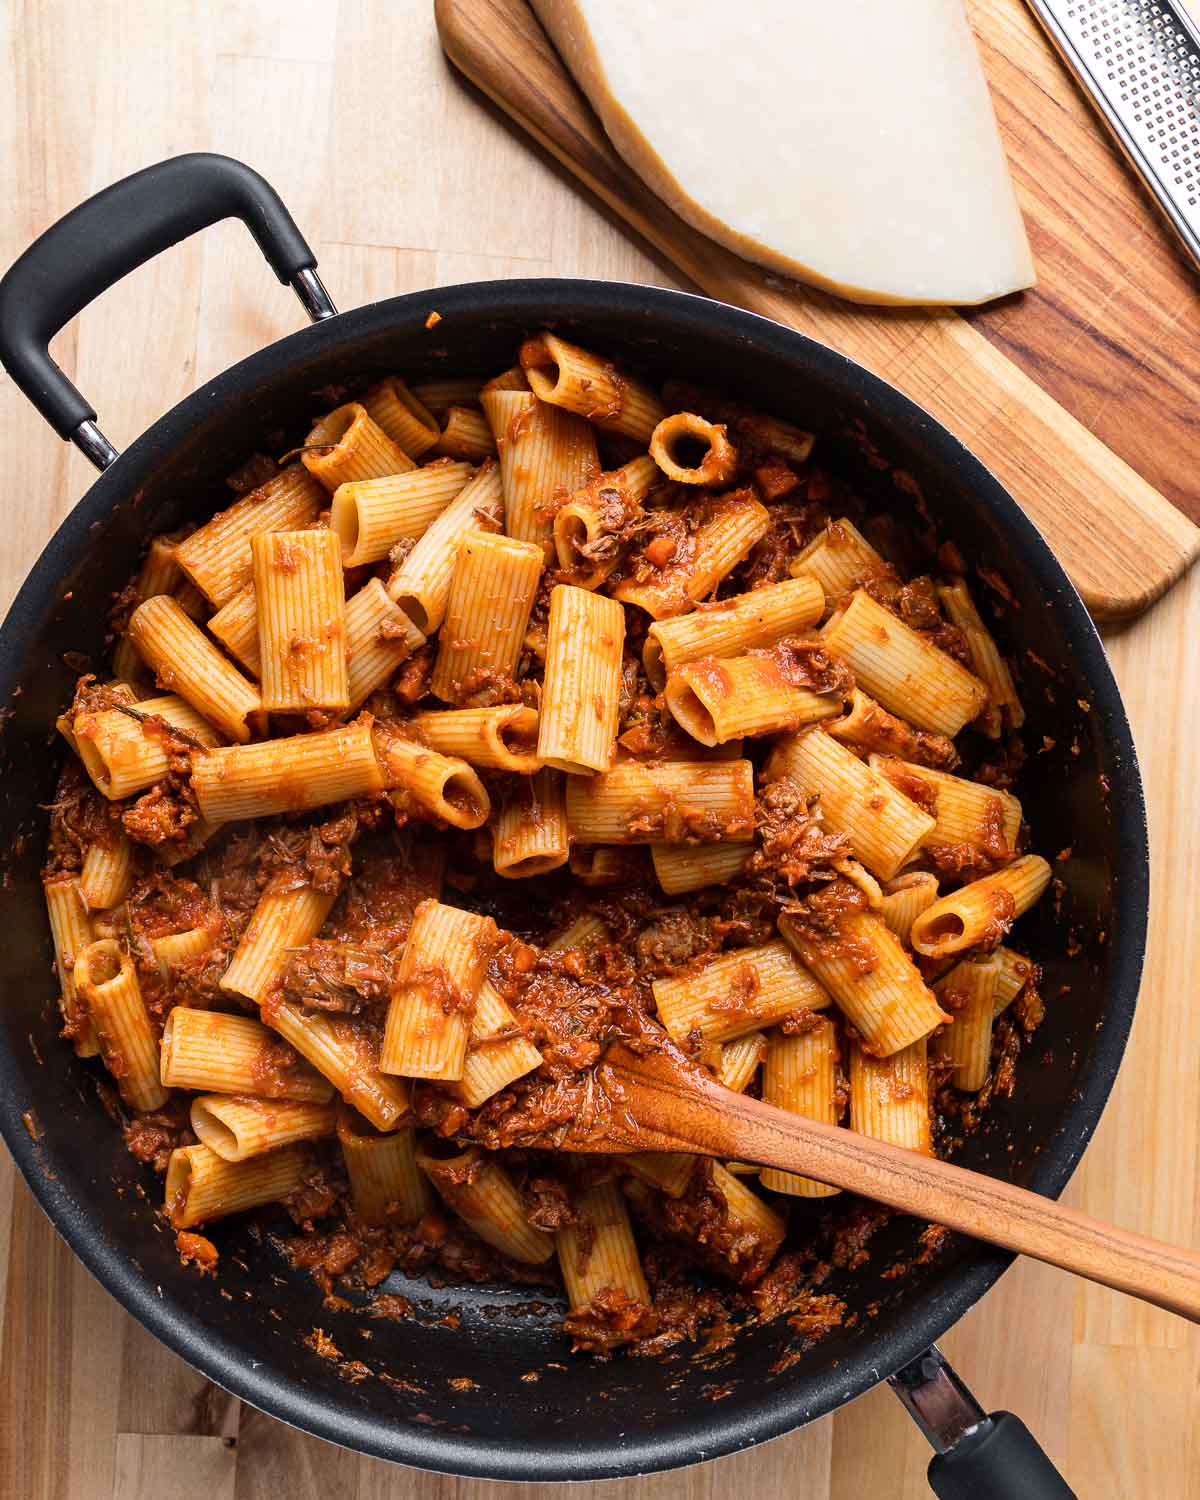 Large black pan with rigatoni lamb ragu and block of Parmigiano Reggiano on the side.